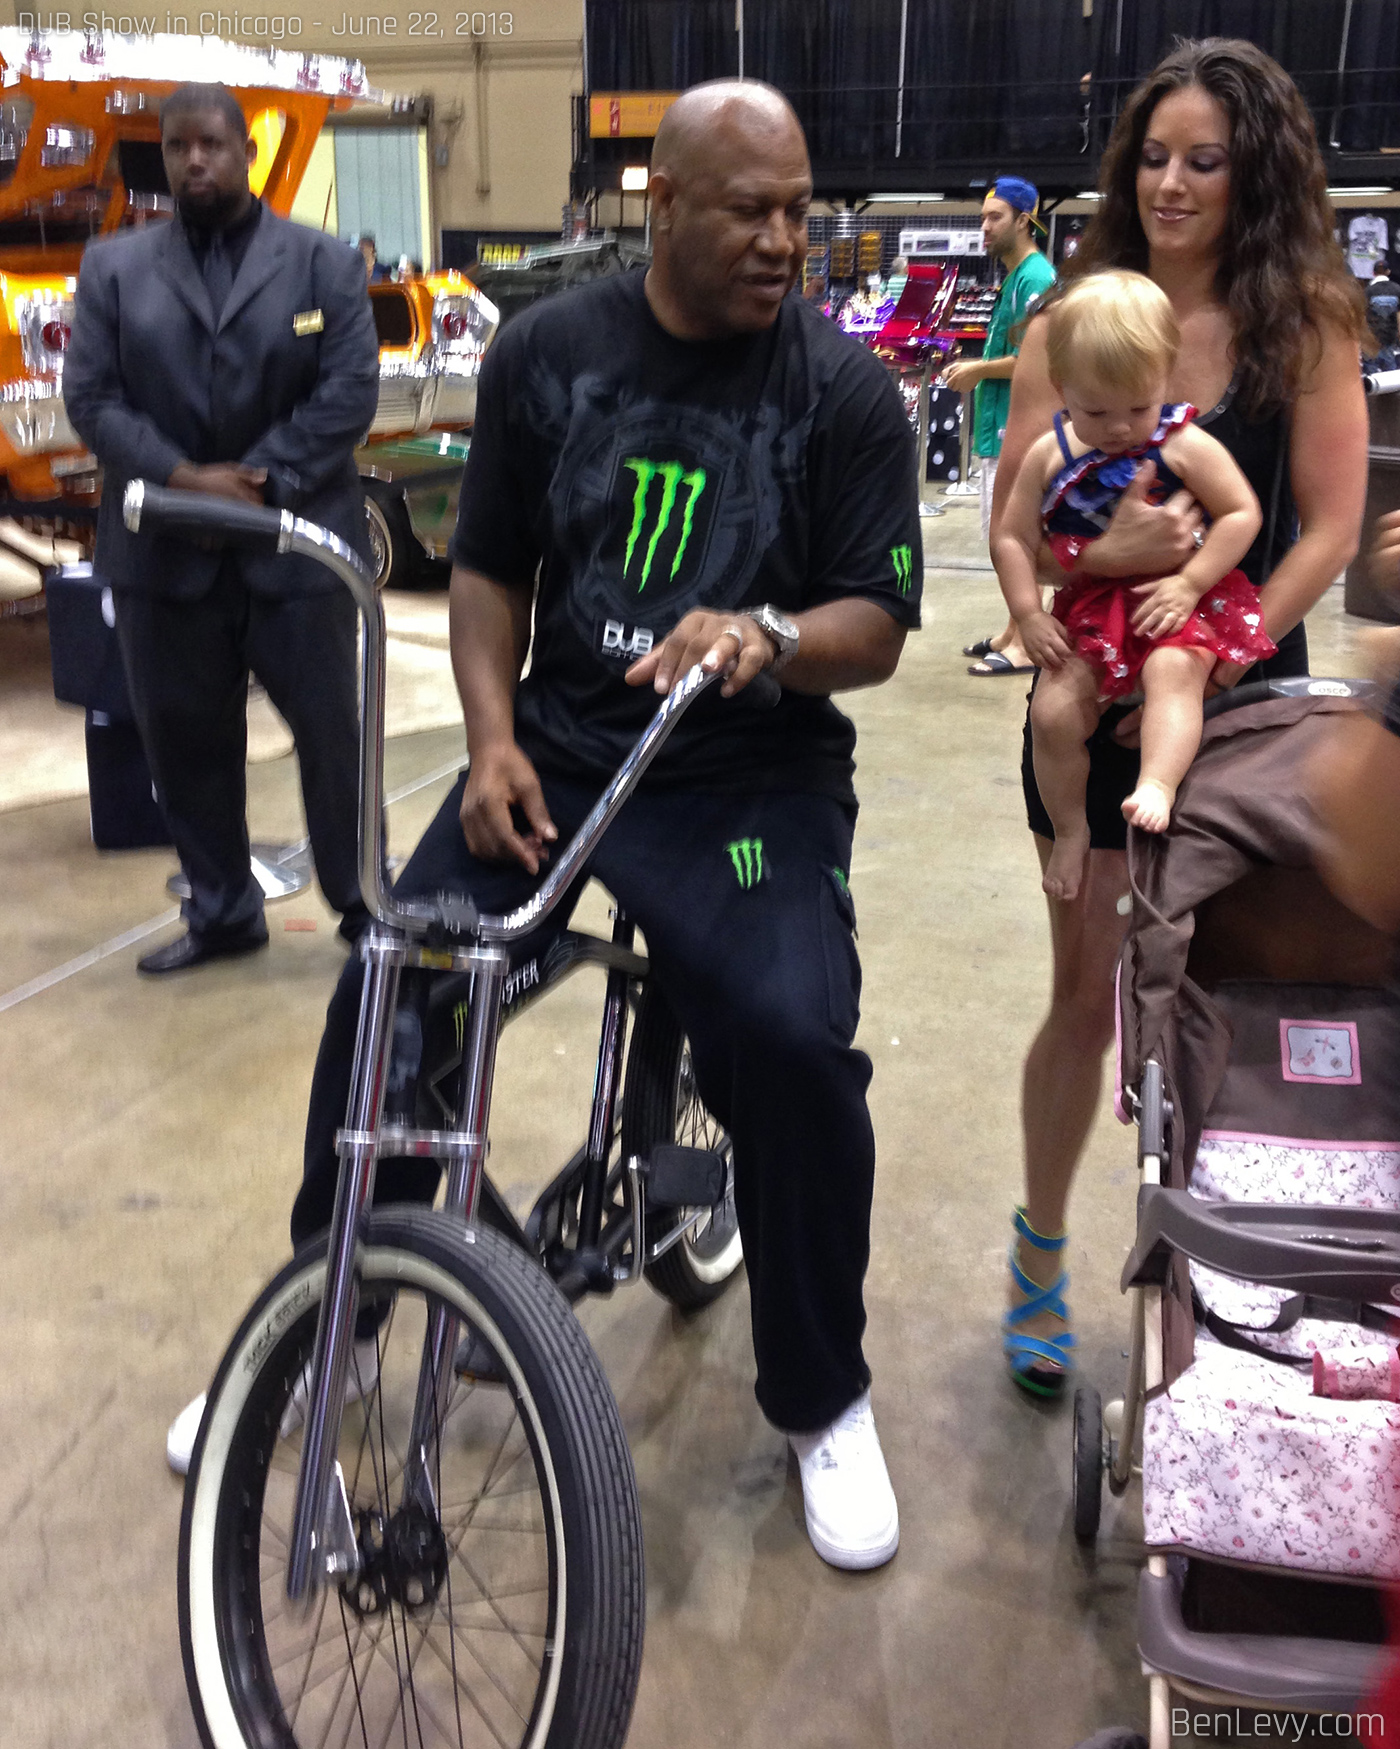 Tommy "Tiny" Lister at the 2013 DUB Show in Chicago